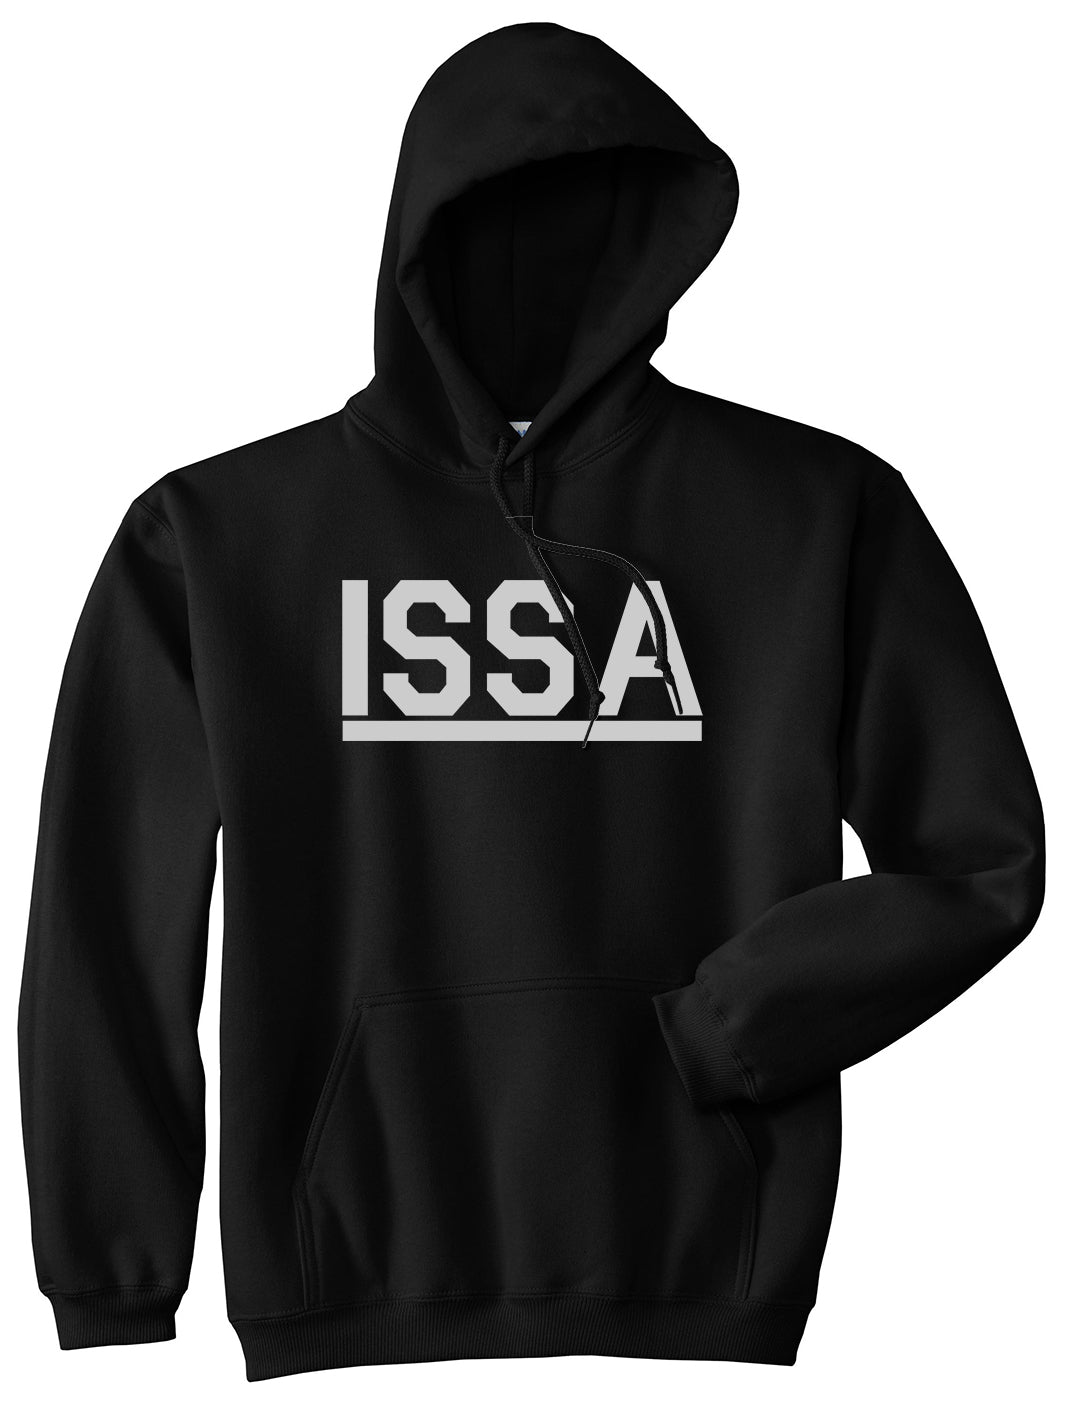 ISSA Black Pullover Hoodie by Kings Of NY